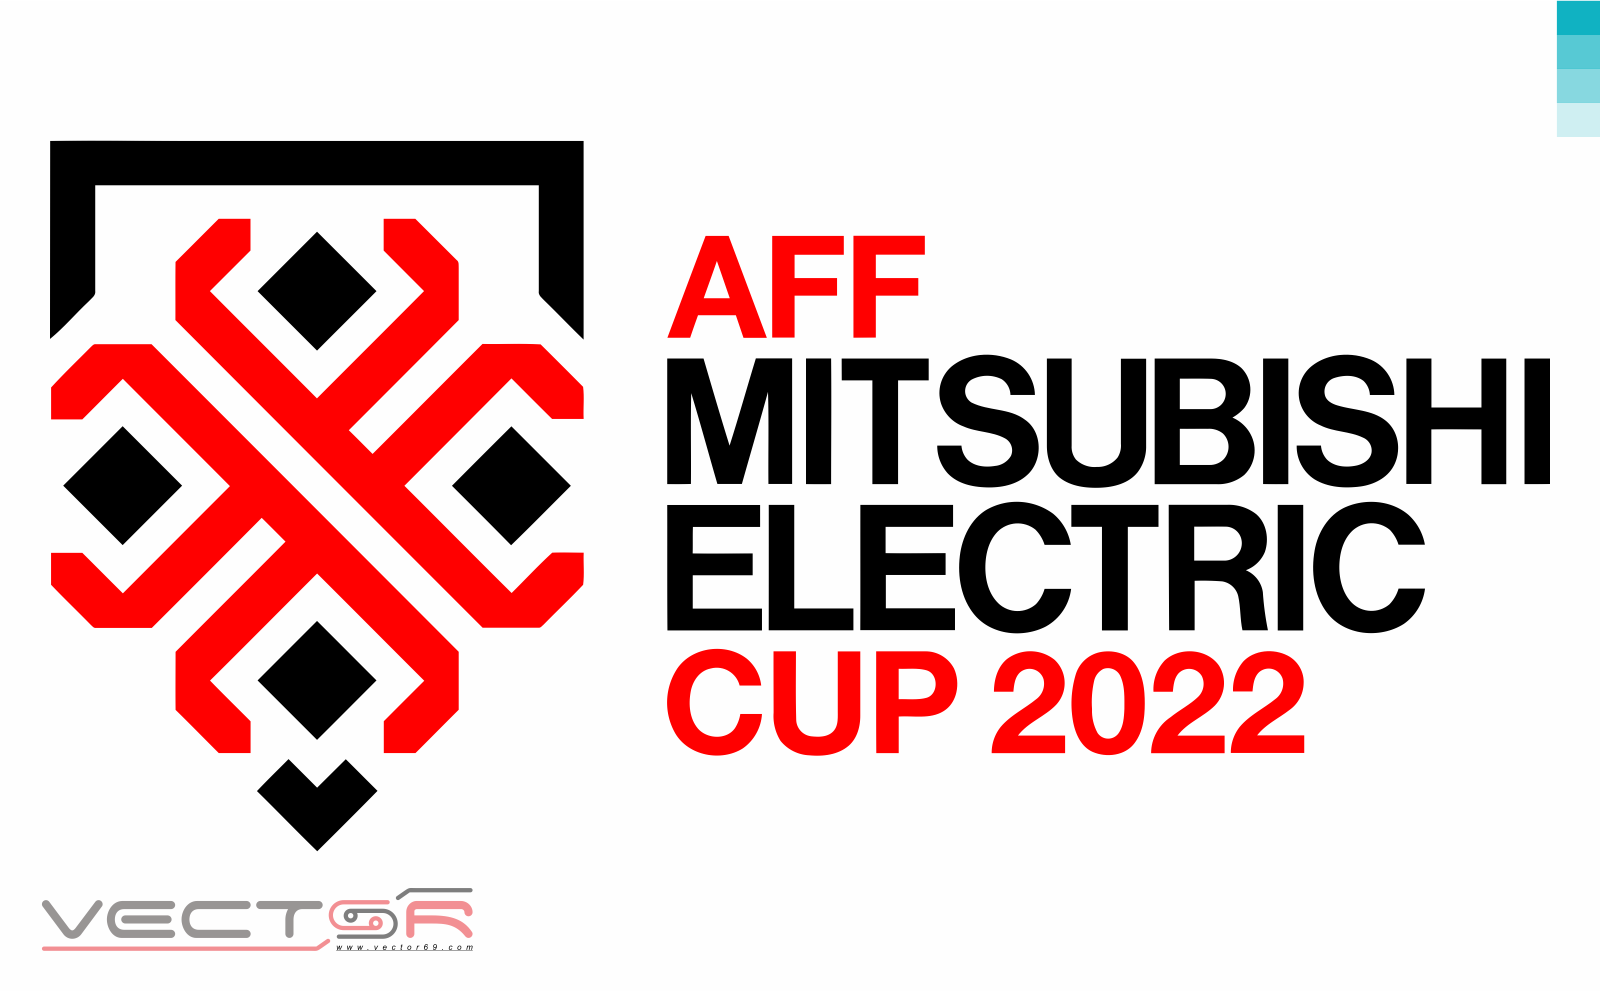 AFF Mitsubishi Electric Cup 2022 Logo - Download Vector File SVG (Scalable Vector Graphics)